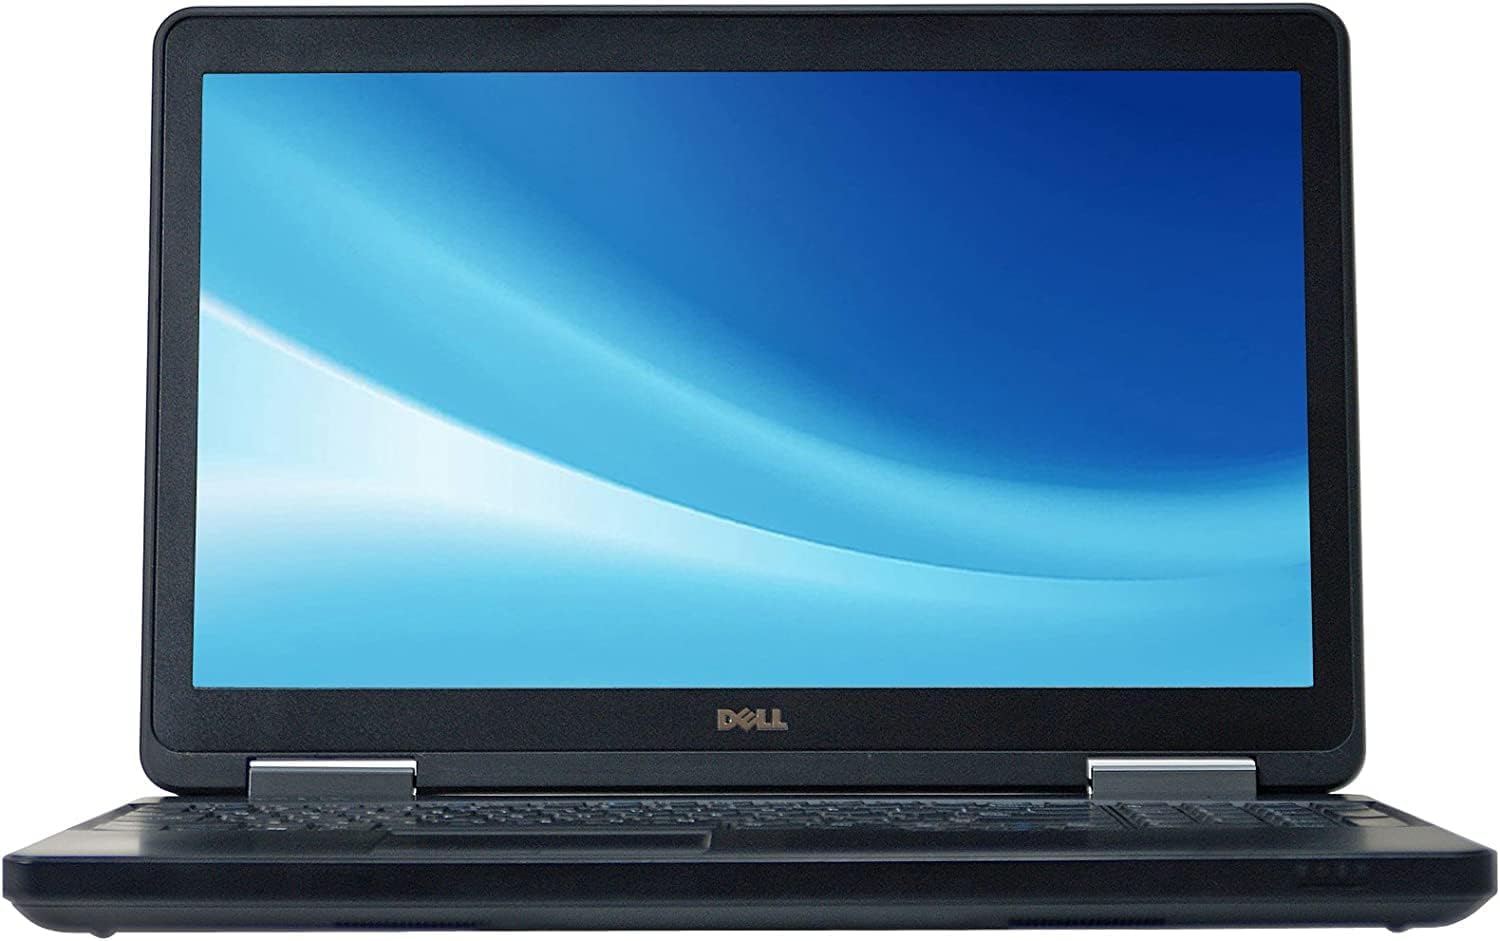 Refurbished Dell Latitude E5540 Laptop Computer, Intel Core i5, 16GB Ram, 256GB Solid State Drive, Windows 11 Operating System, 1 Year Warranty